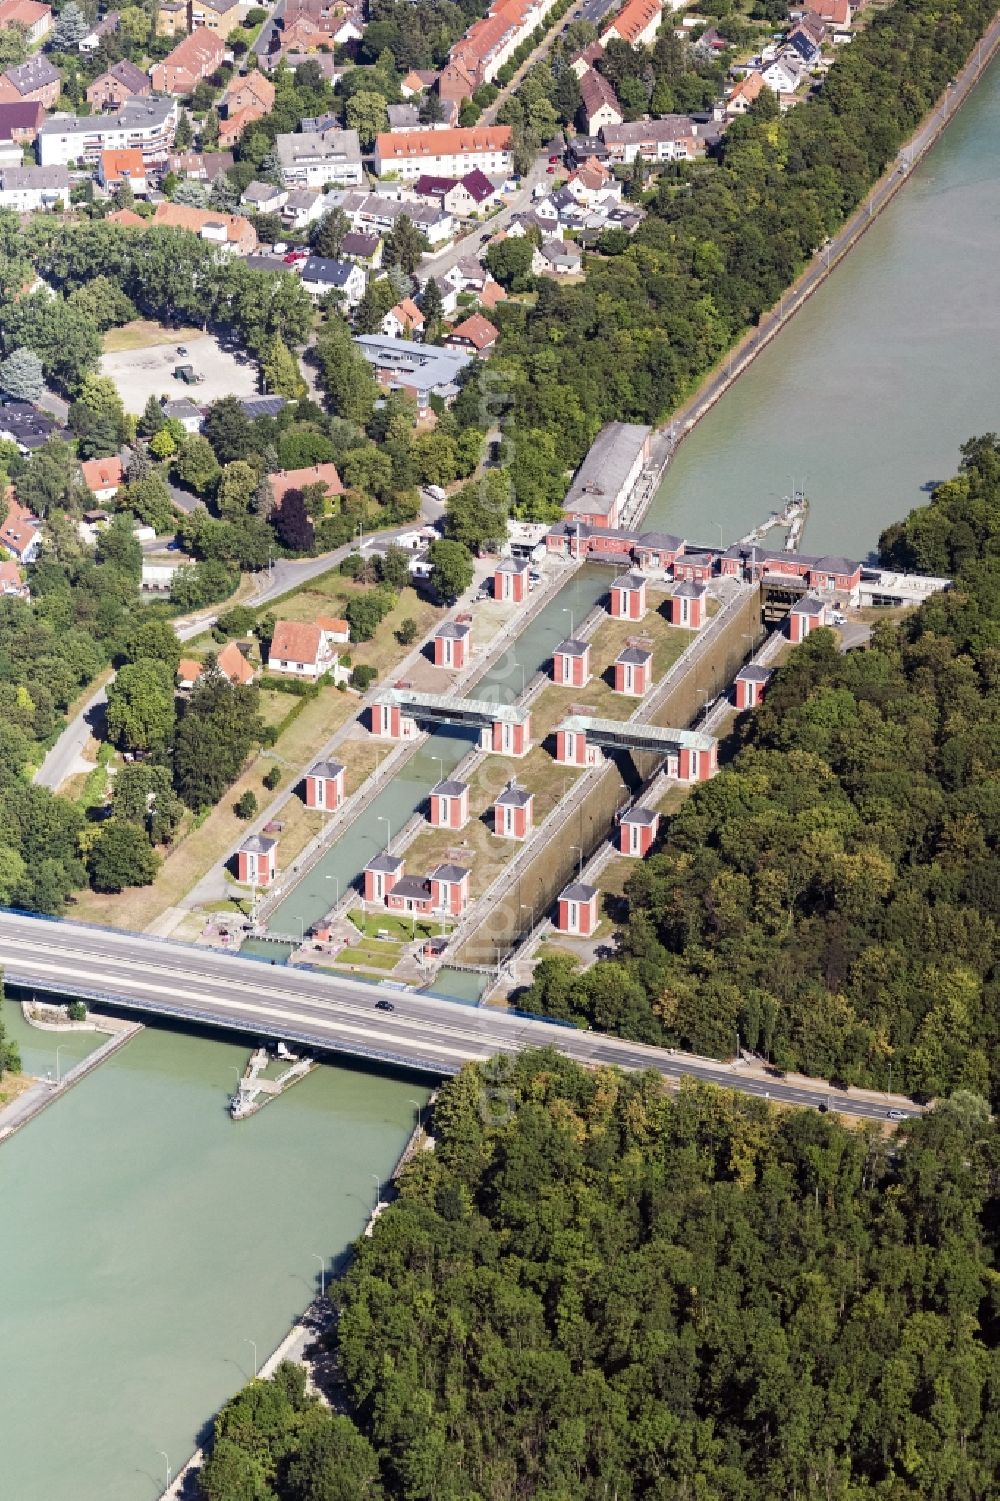 Sehnde from above - Lockage of the Anderten on Mittelkonal in Sehnde in the state Lower Saxony, Germany